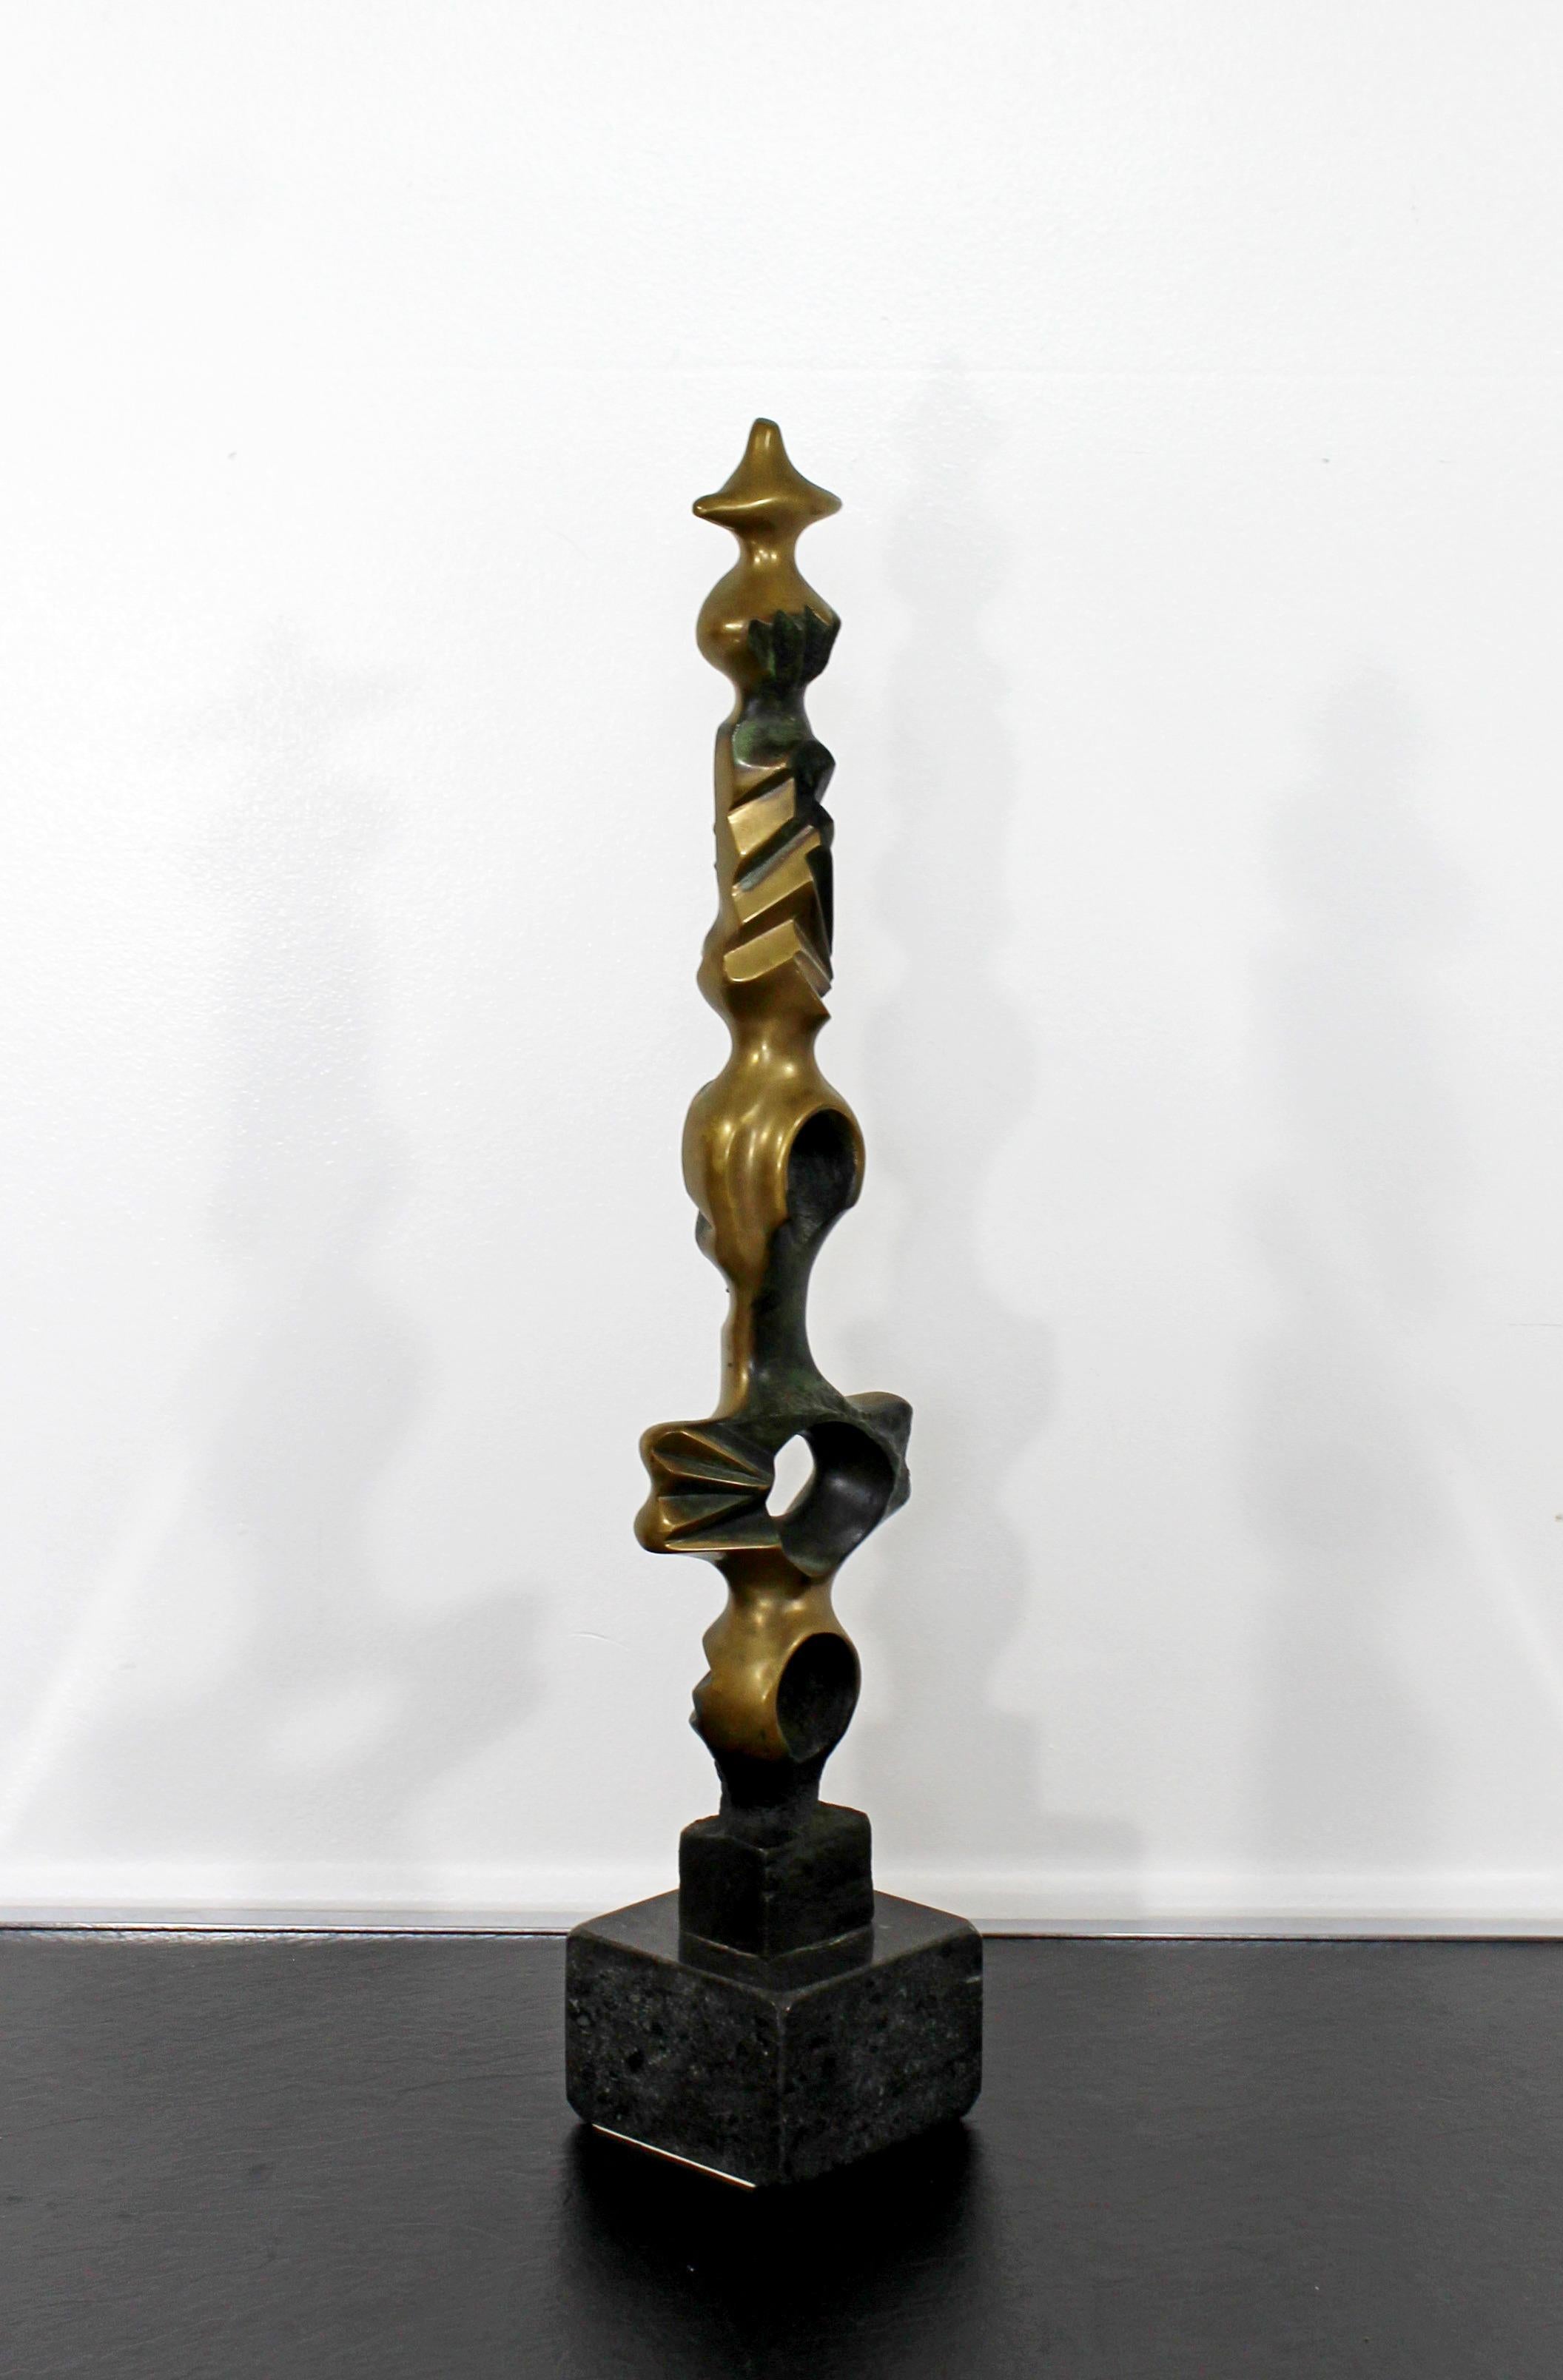 Late 20th Century Contemporary Bronze Marble Table Sculpture Signed by Kieff Grediaga TOTEM, 1980s